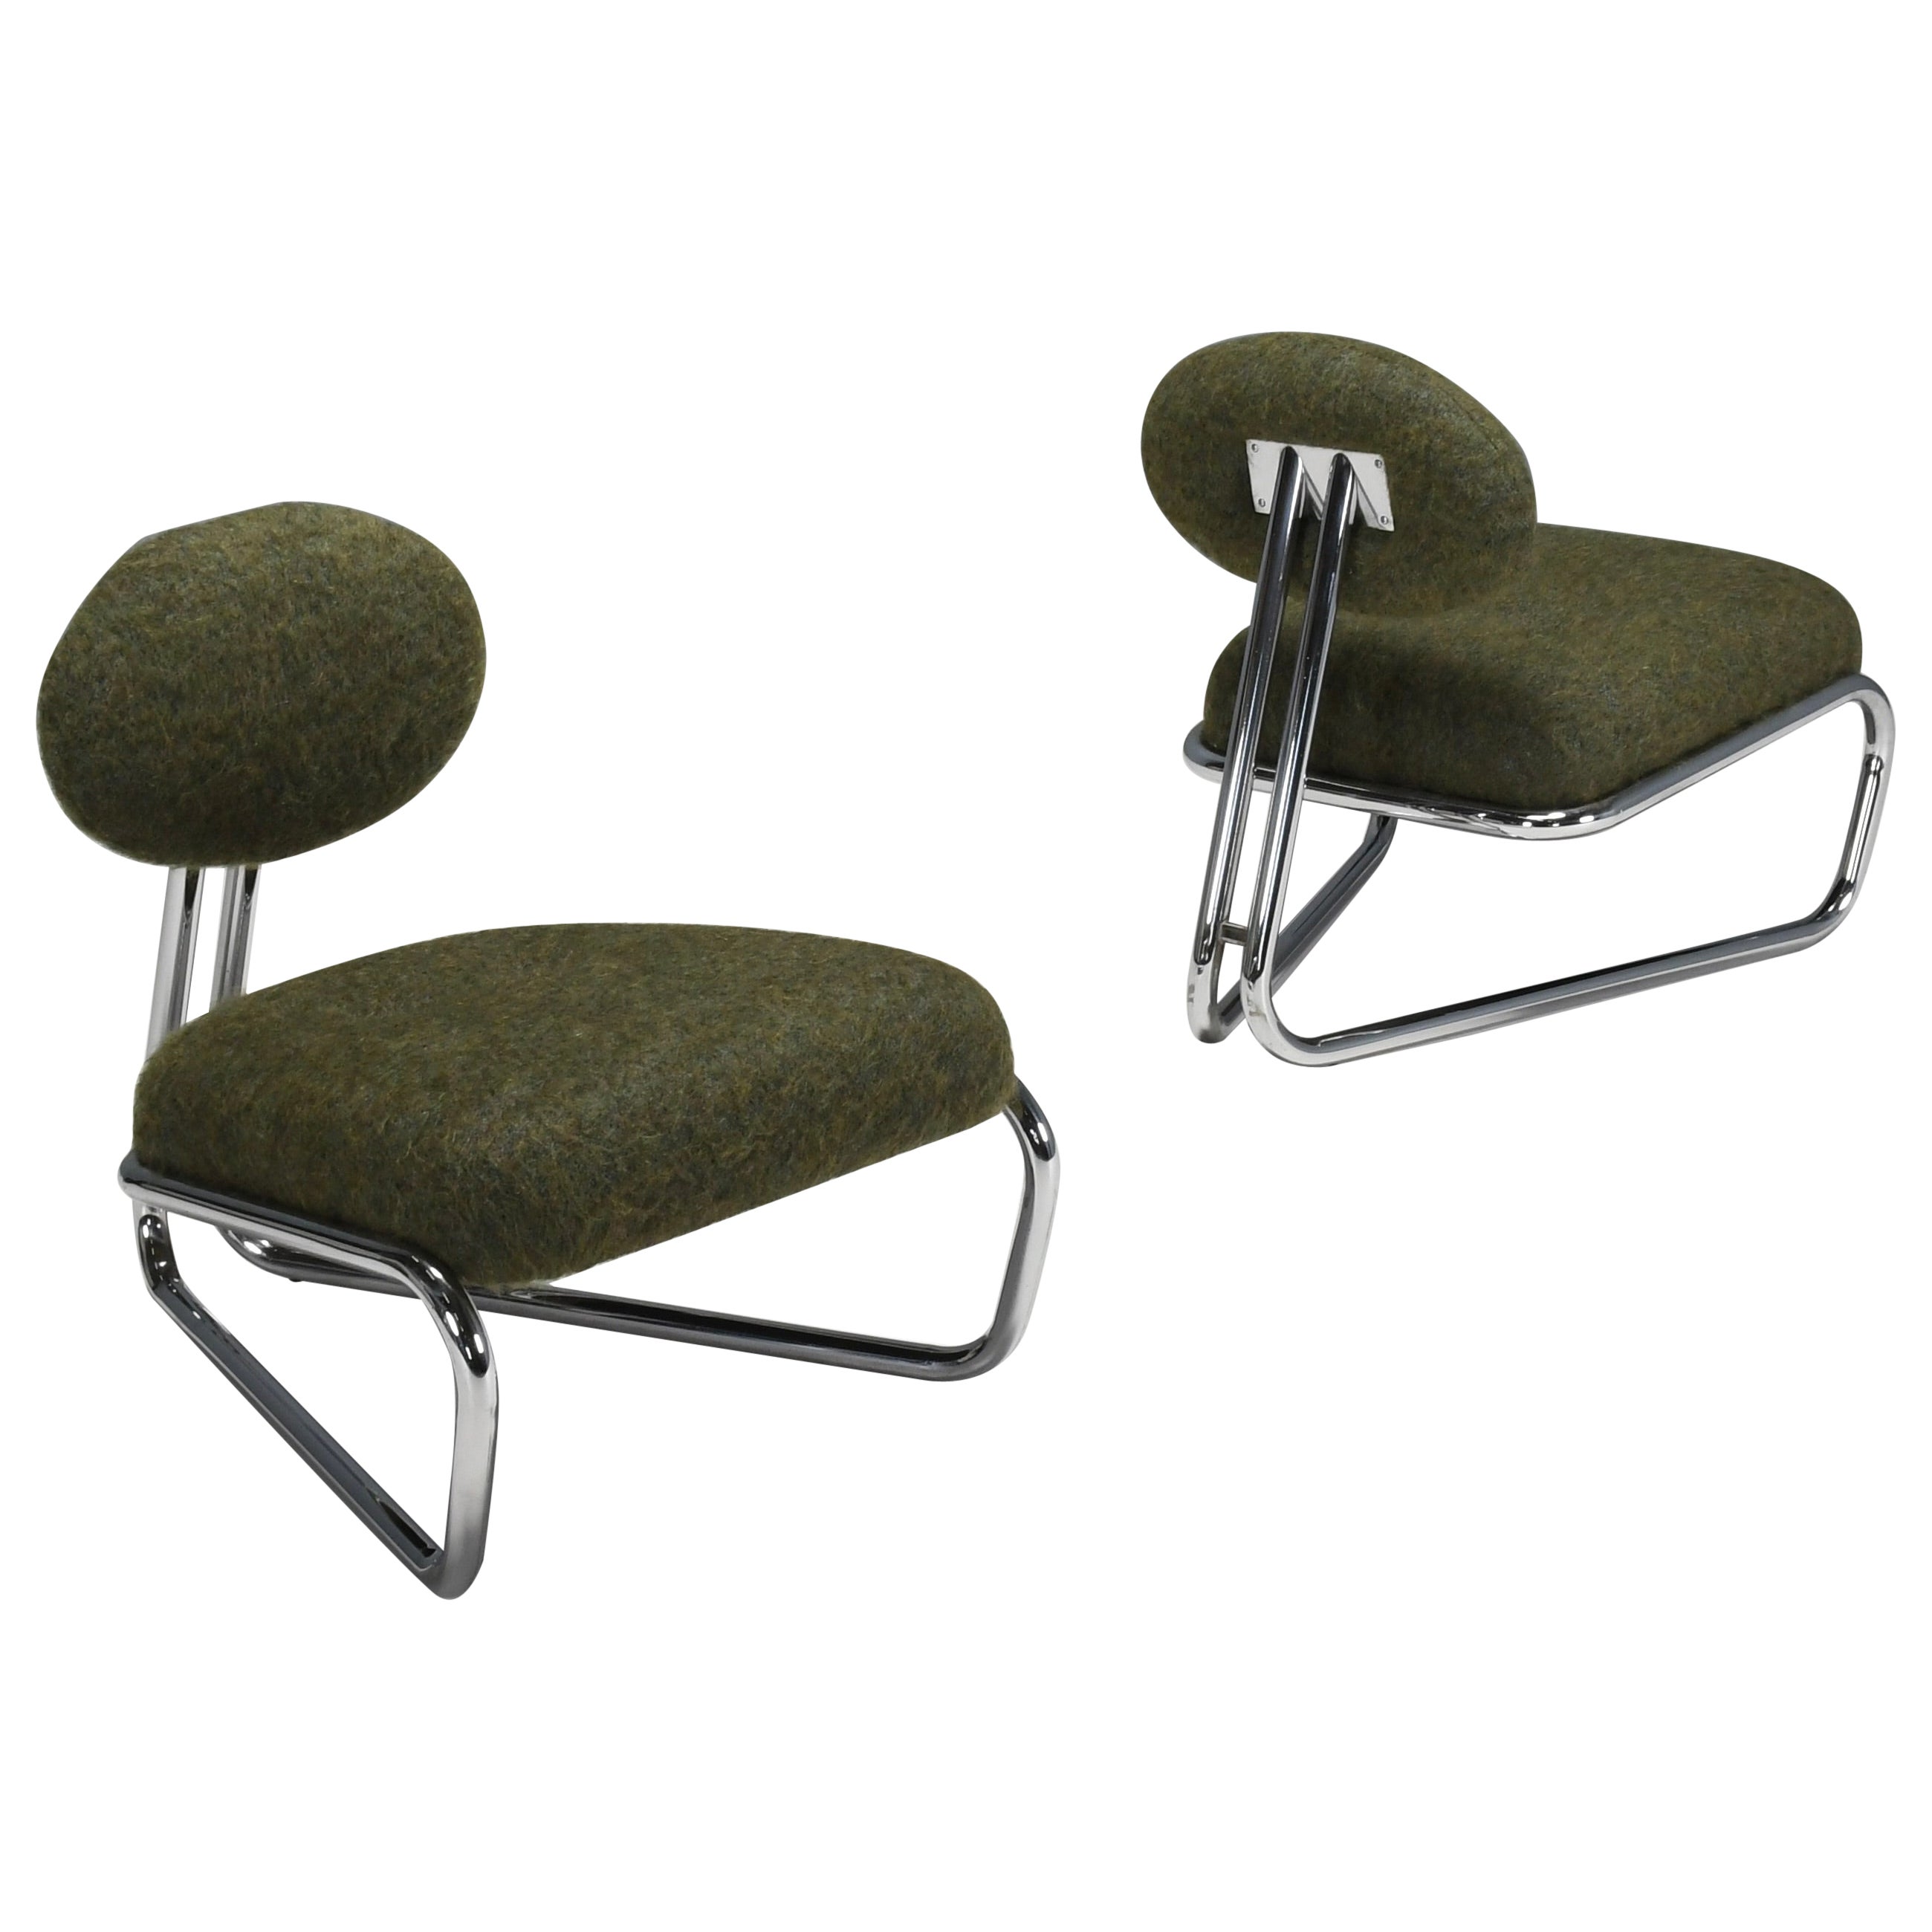 Exceptional Modernist Cantilever chairs in Wool and Alpaca, Italy 1970s  For Sale